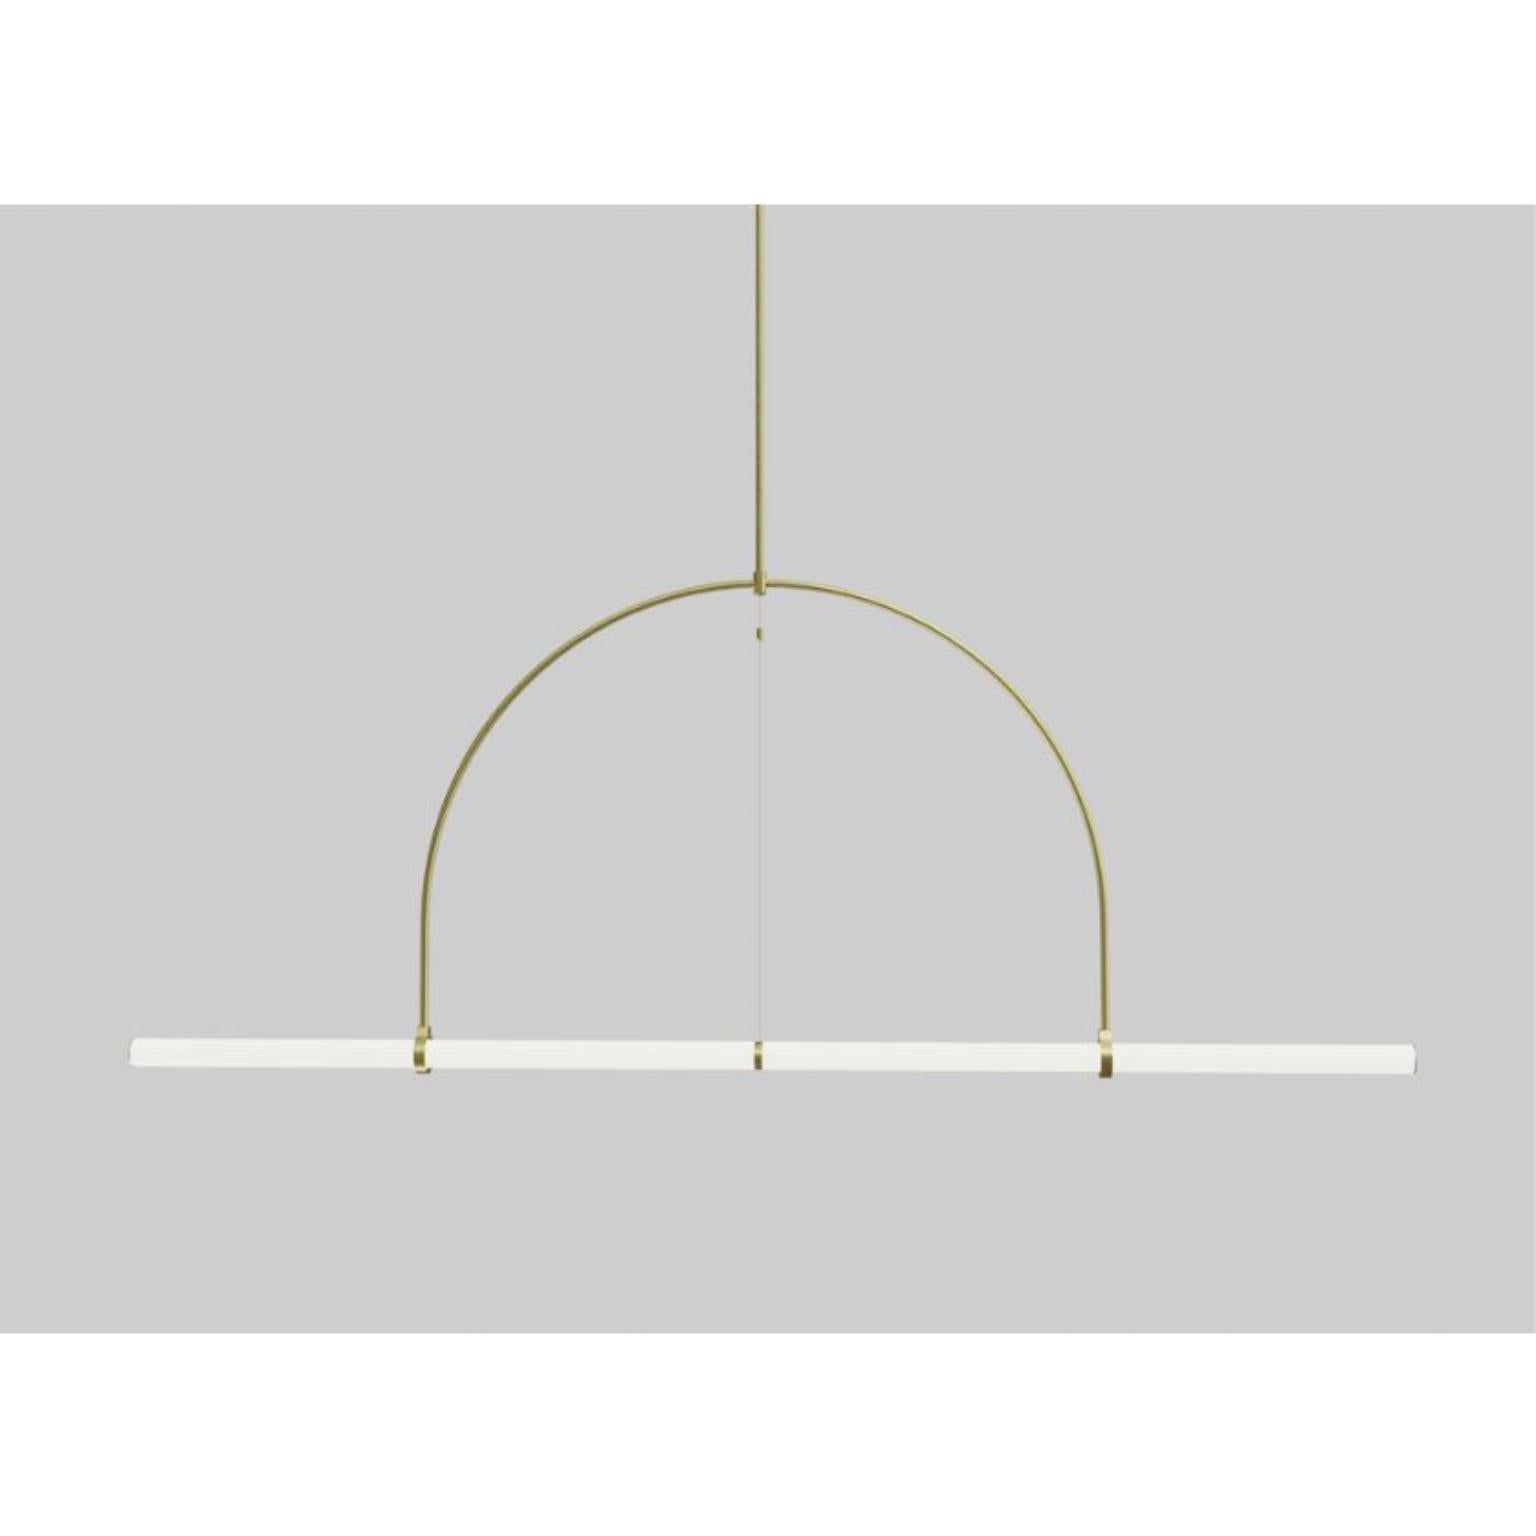 Light Object 024 by Naama Hofman
Dimensions: W 4 x D 165 x H 4 cm
Material: brass, acrylic tube, LED lights
Weight:2.5 kg / 5.5 lbs

Suspension:
DIA 1 cm / 0.4 In brass stem in matching finish.
Height to order.
Maximum length 2 m.

Canopy:
DIA 21 cm